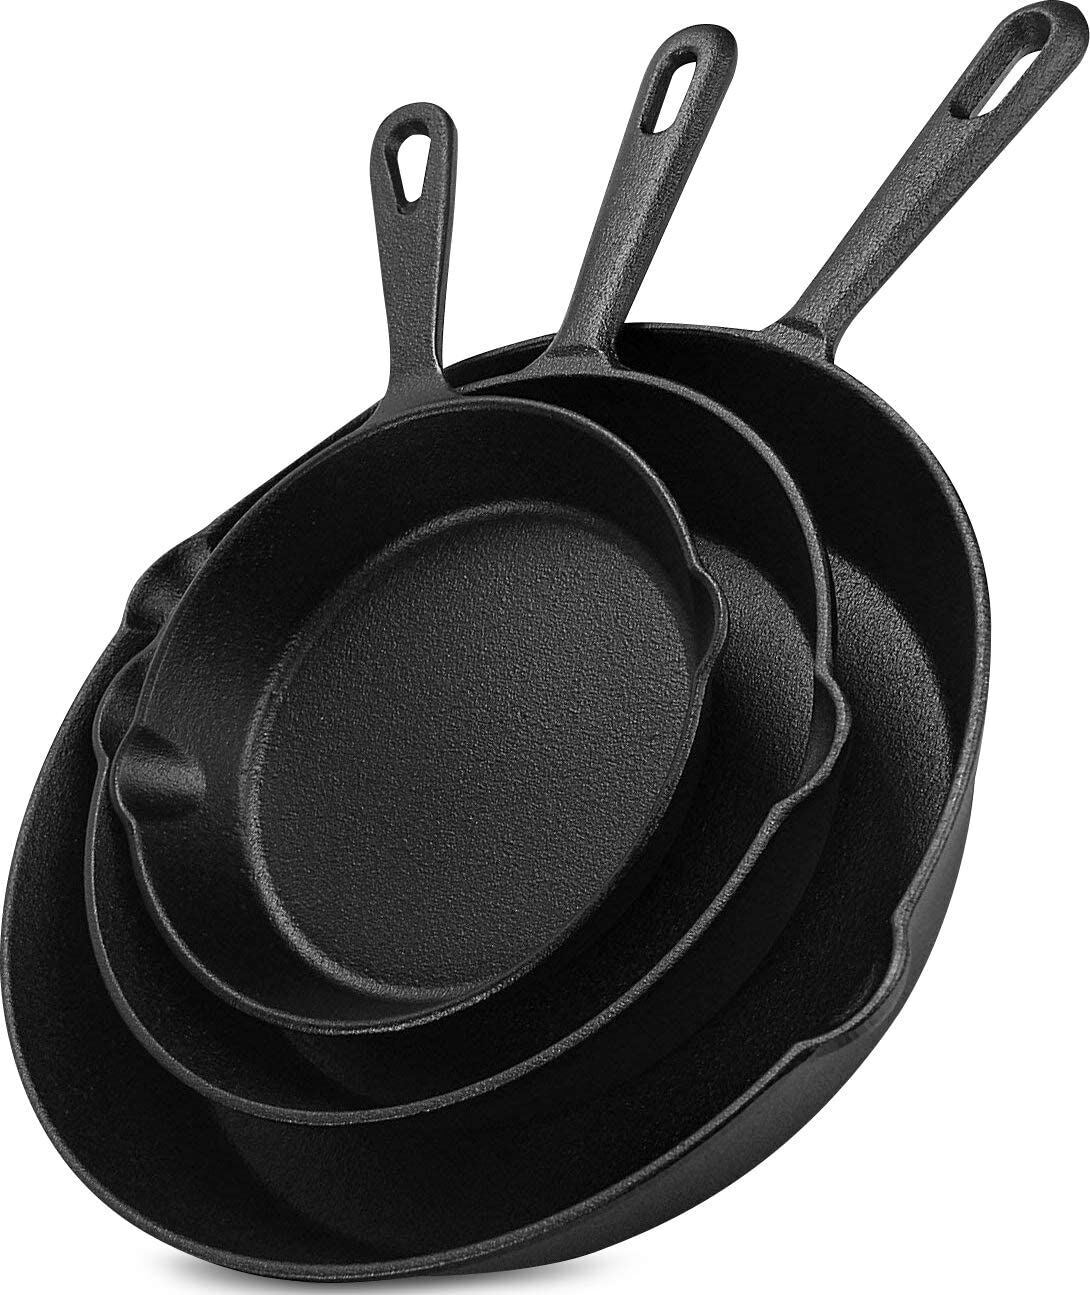 Utopia Kitchen Pre-Seasoned Cast Iron Skillet Set 3-Piece - 6 , 8 and 10 Inches